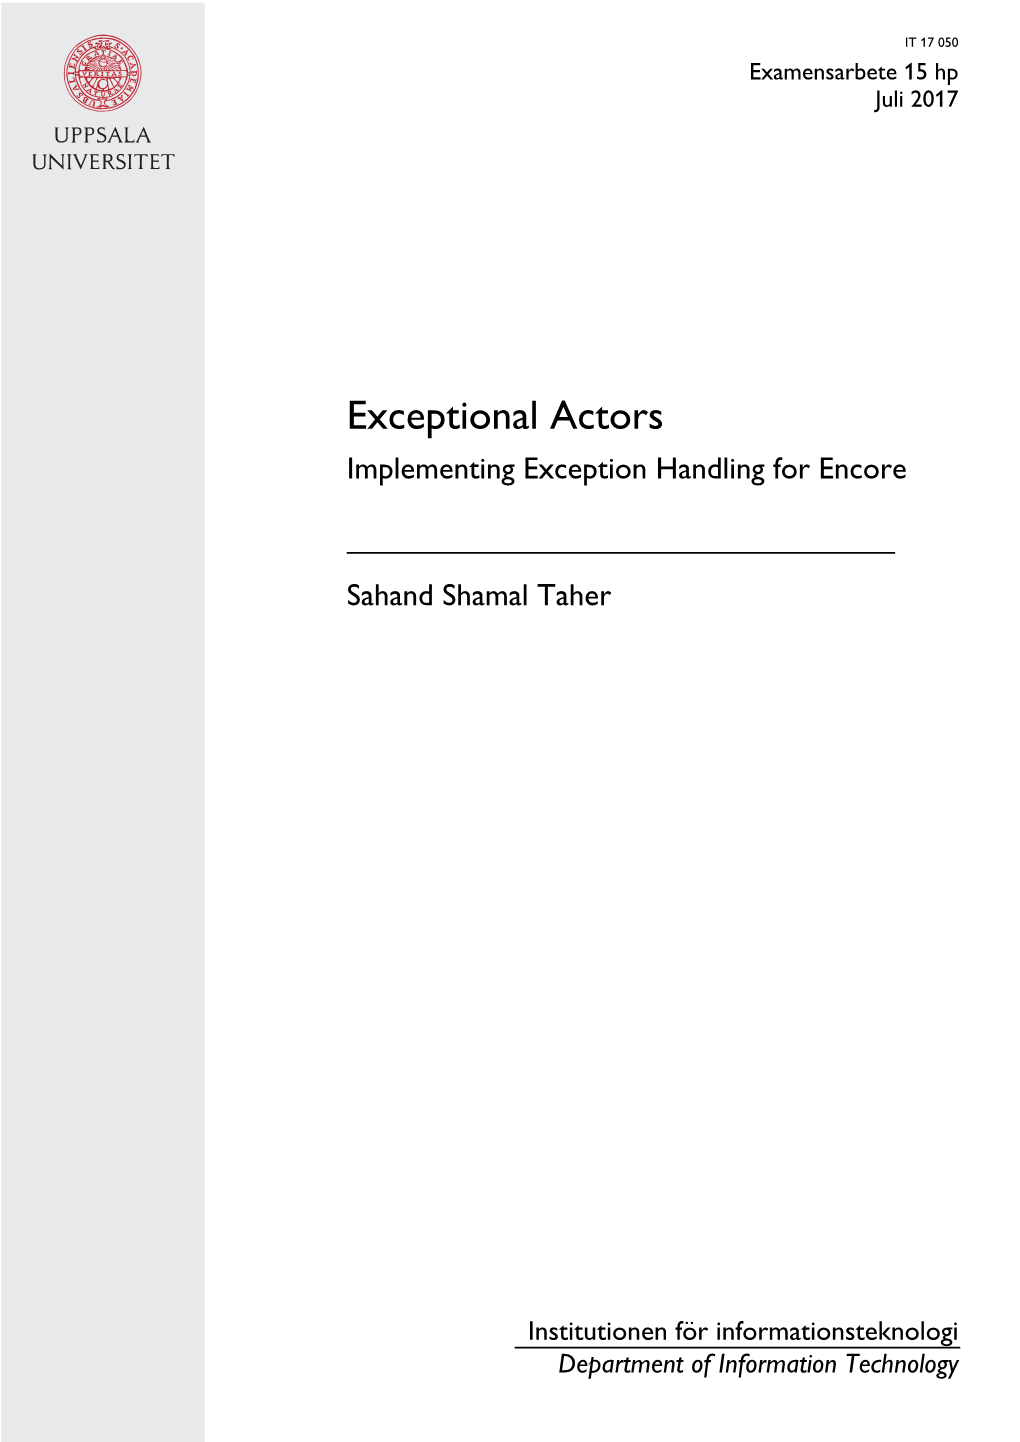 Exceptional Actors Implementing Exception Handling for Encore